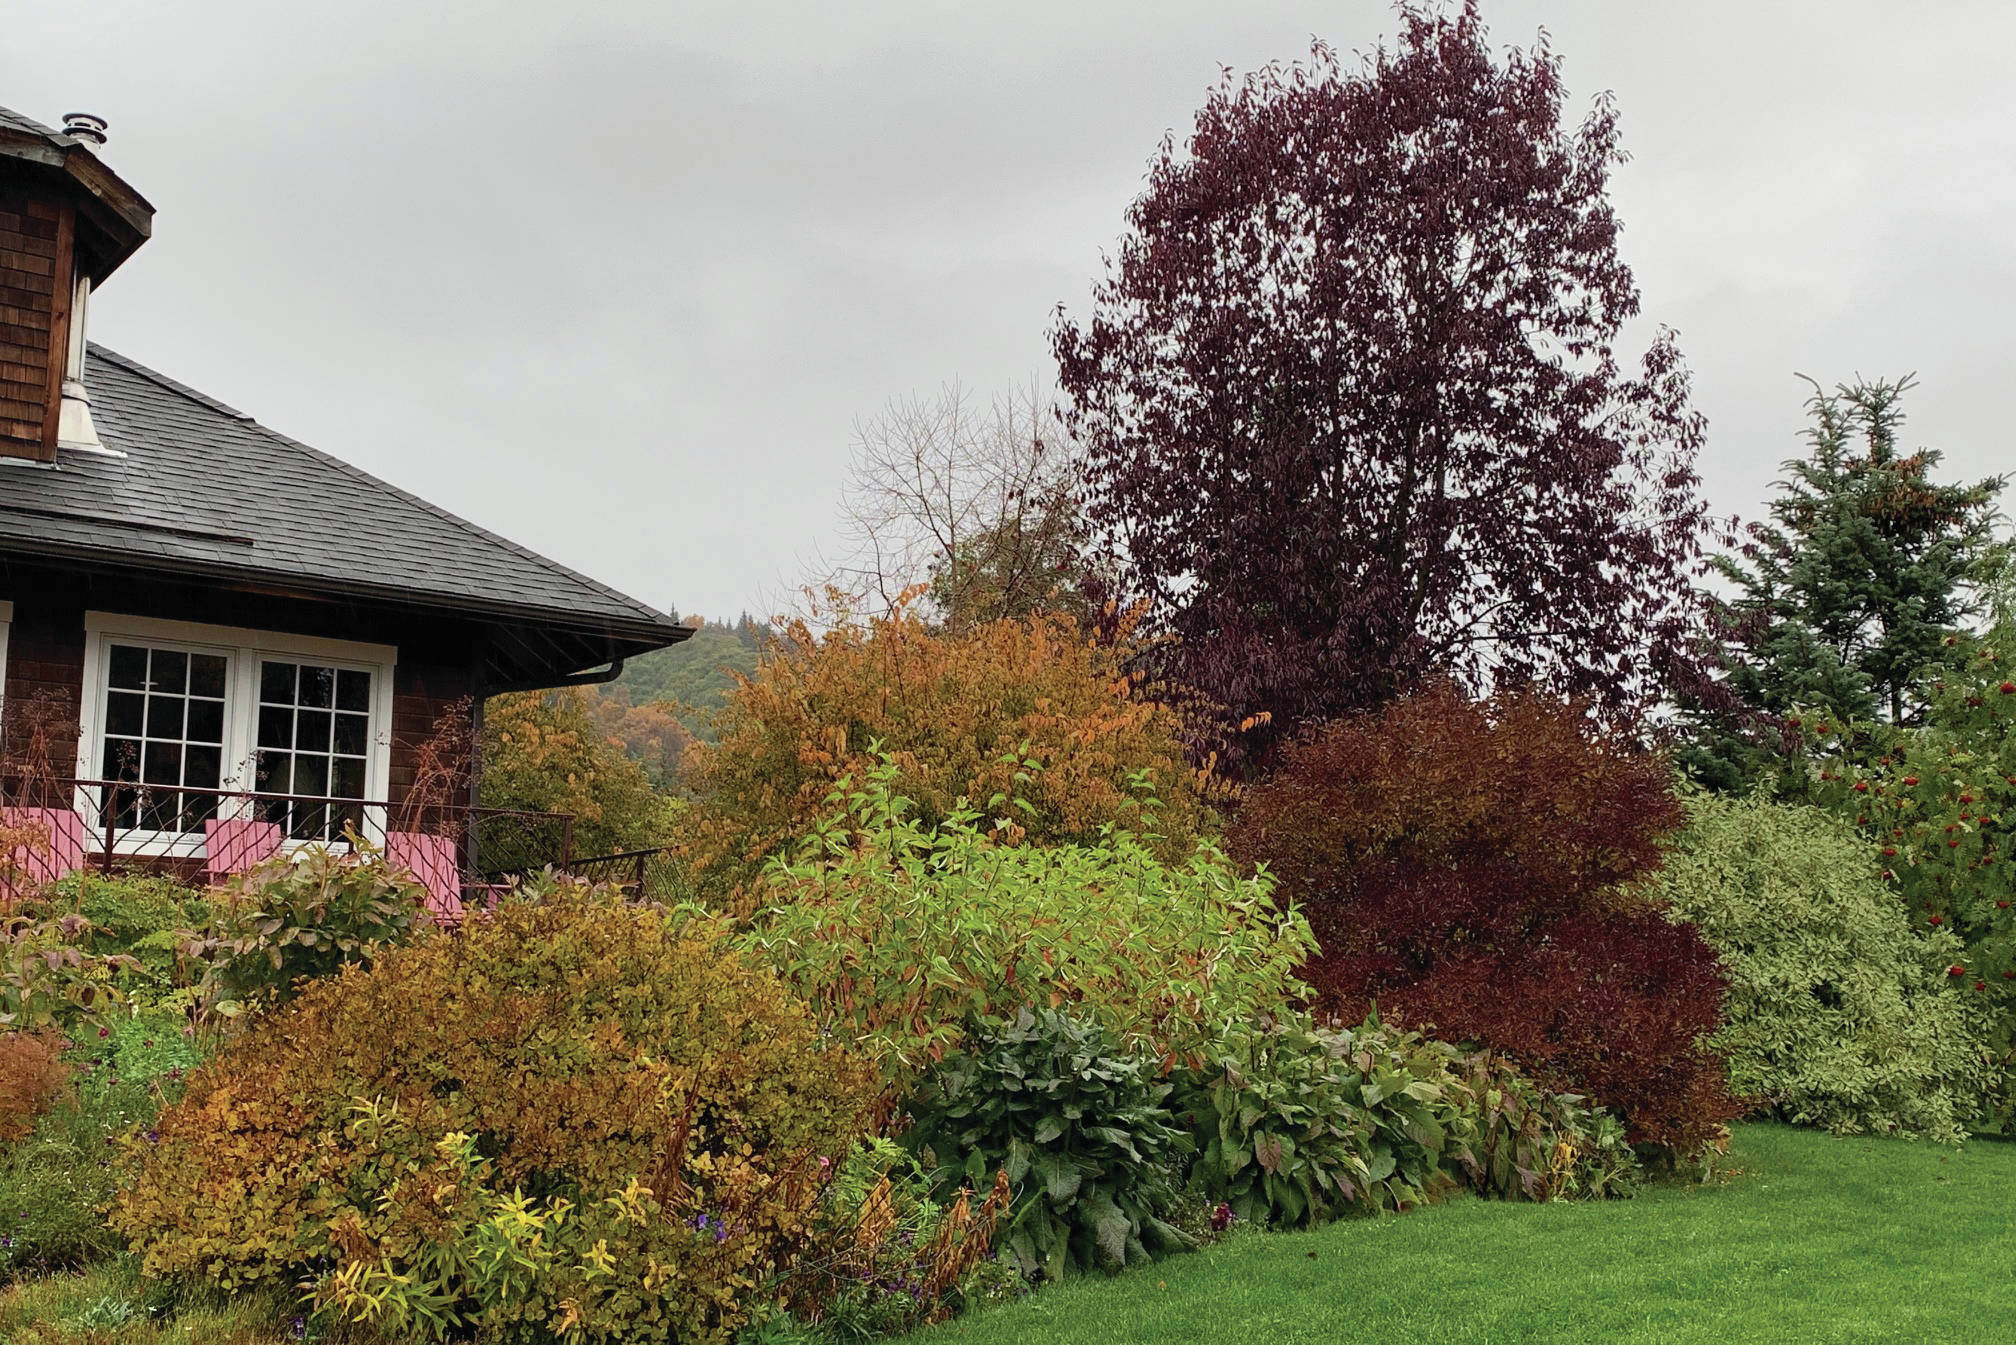 Dwarf Korean lilac, dwarf red twig dogwood, Miss Kim lilac, full size dogwood and a Shubert chokecerry fill out the space by the Kachemak Gardener’s balcony in this photo taken Oct. 12, 2019, in Homer, Alaska. (Photo by Rosemary Fitzpatrick)